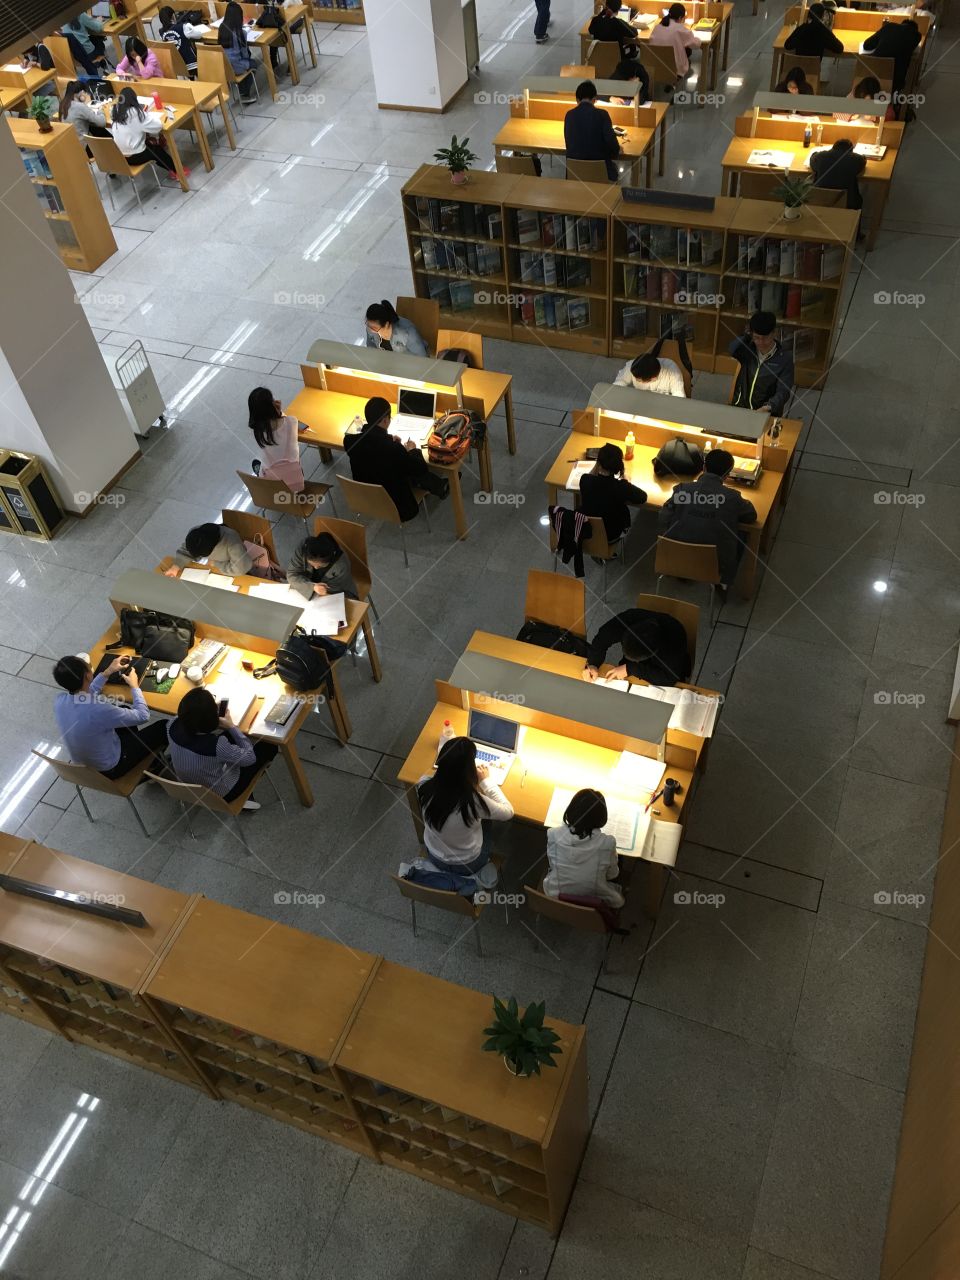 Chinese Students Studying in Shenzhen Library - China